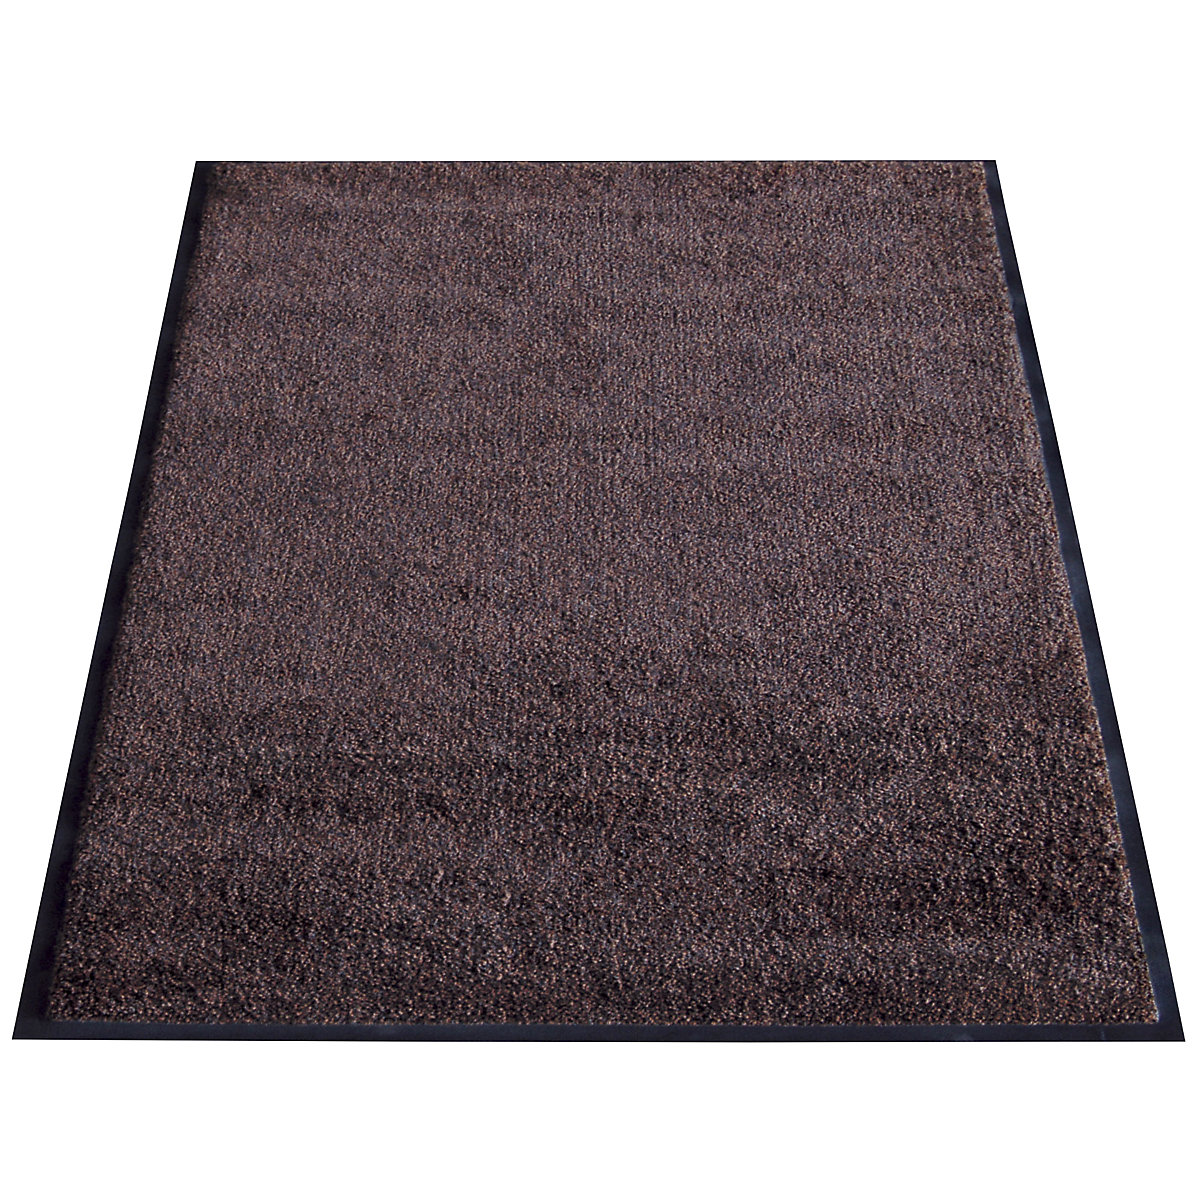 EAZYCARE WASH entrance matting, LxW 1500 x 850 mm, brown